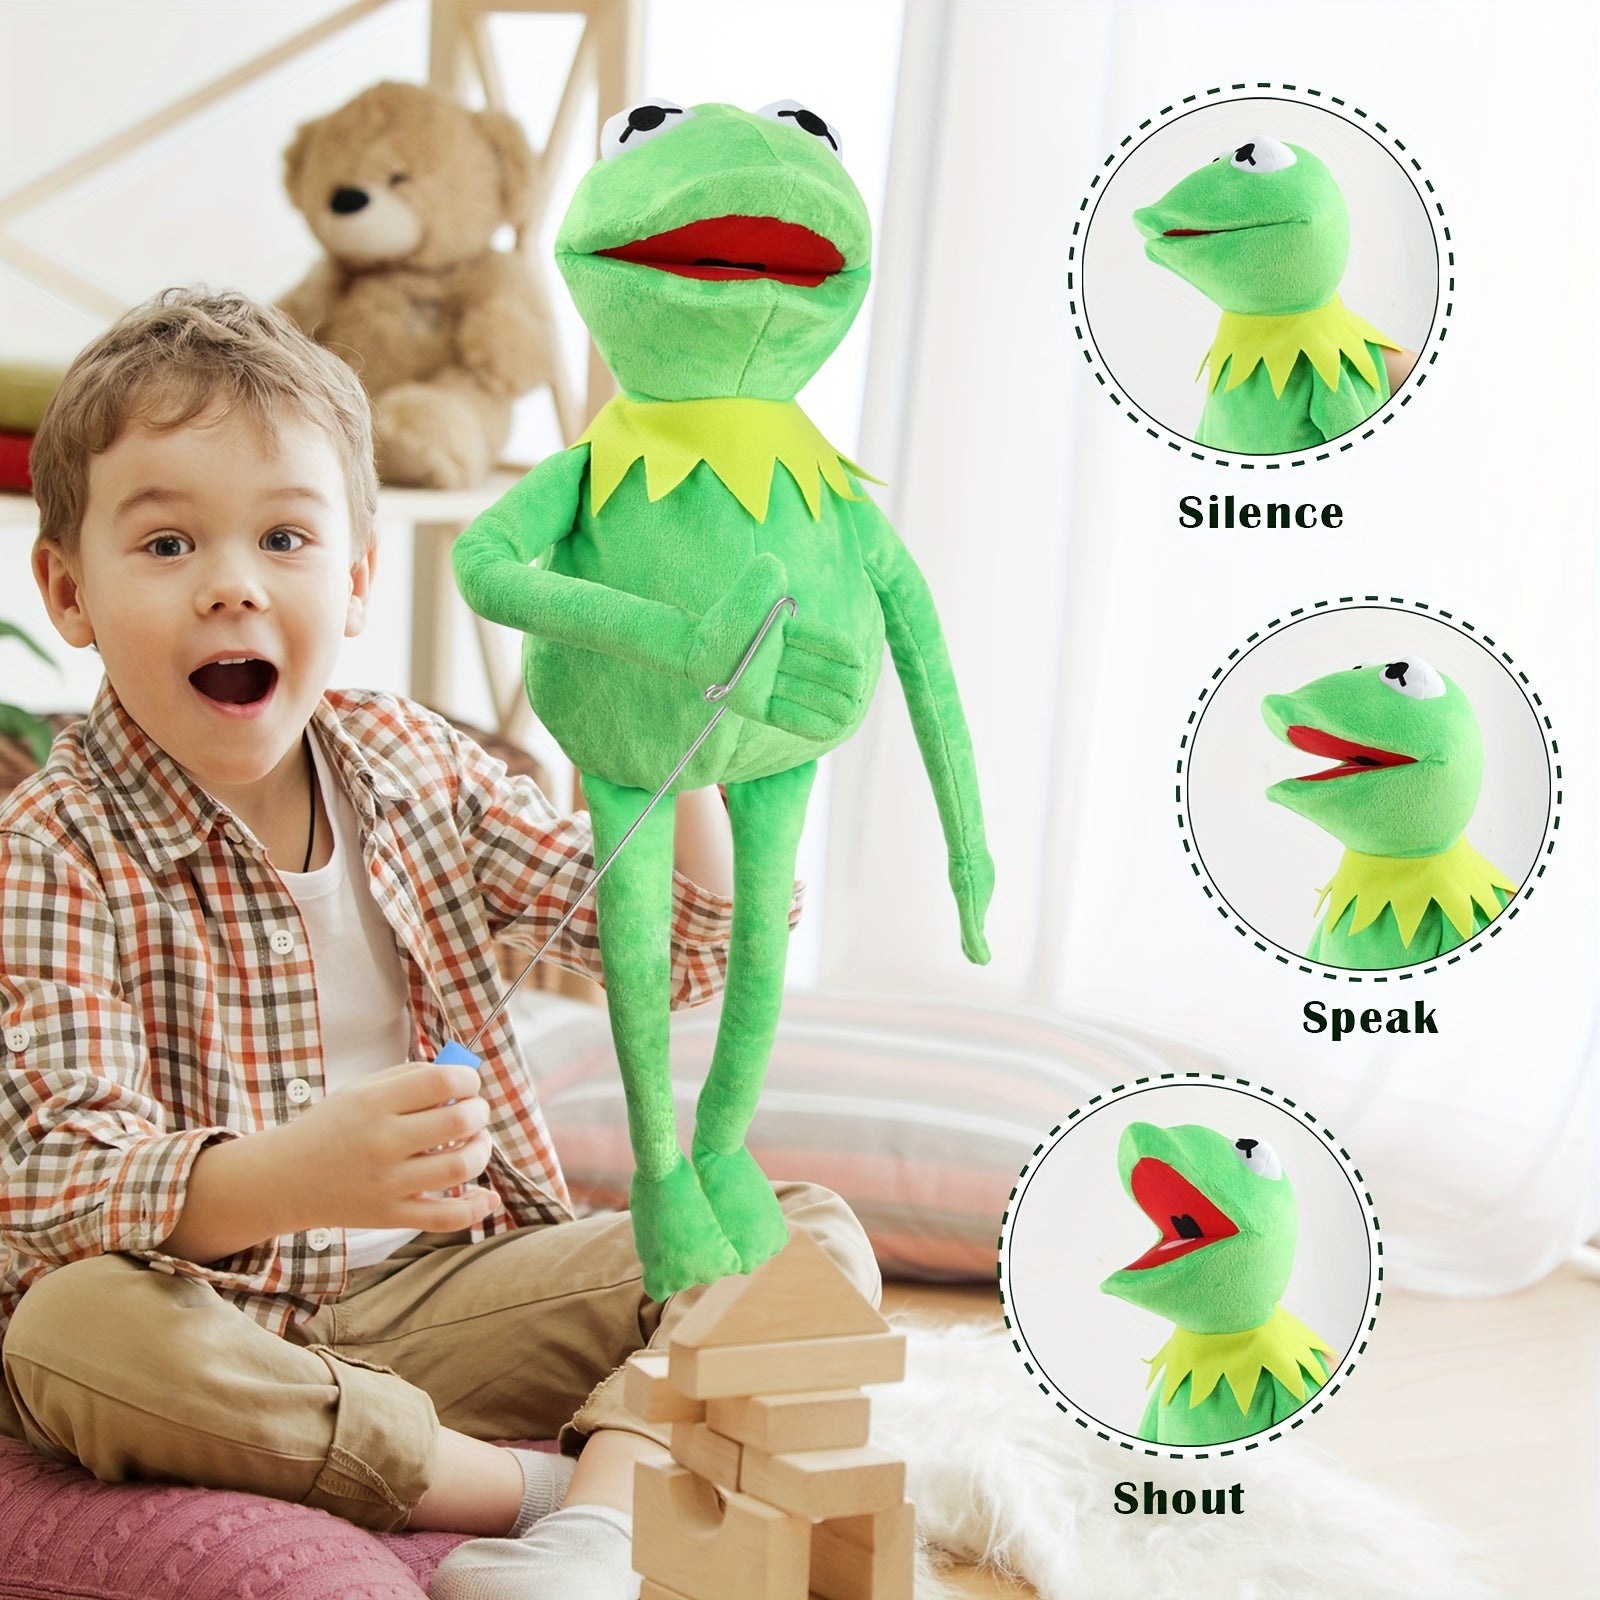 Kermit Frog Puppet With Control Rod Metal Puppet Set,The Muppets Show, Soft Plush Frog Puppet Doll Suitable For Role Play -Green, 24 Inches